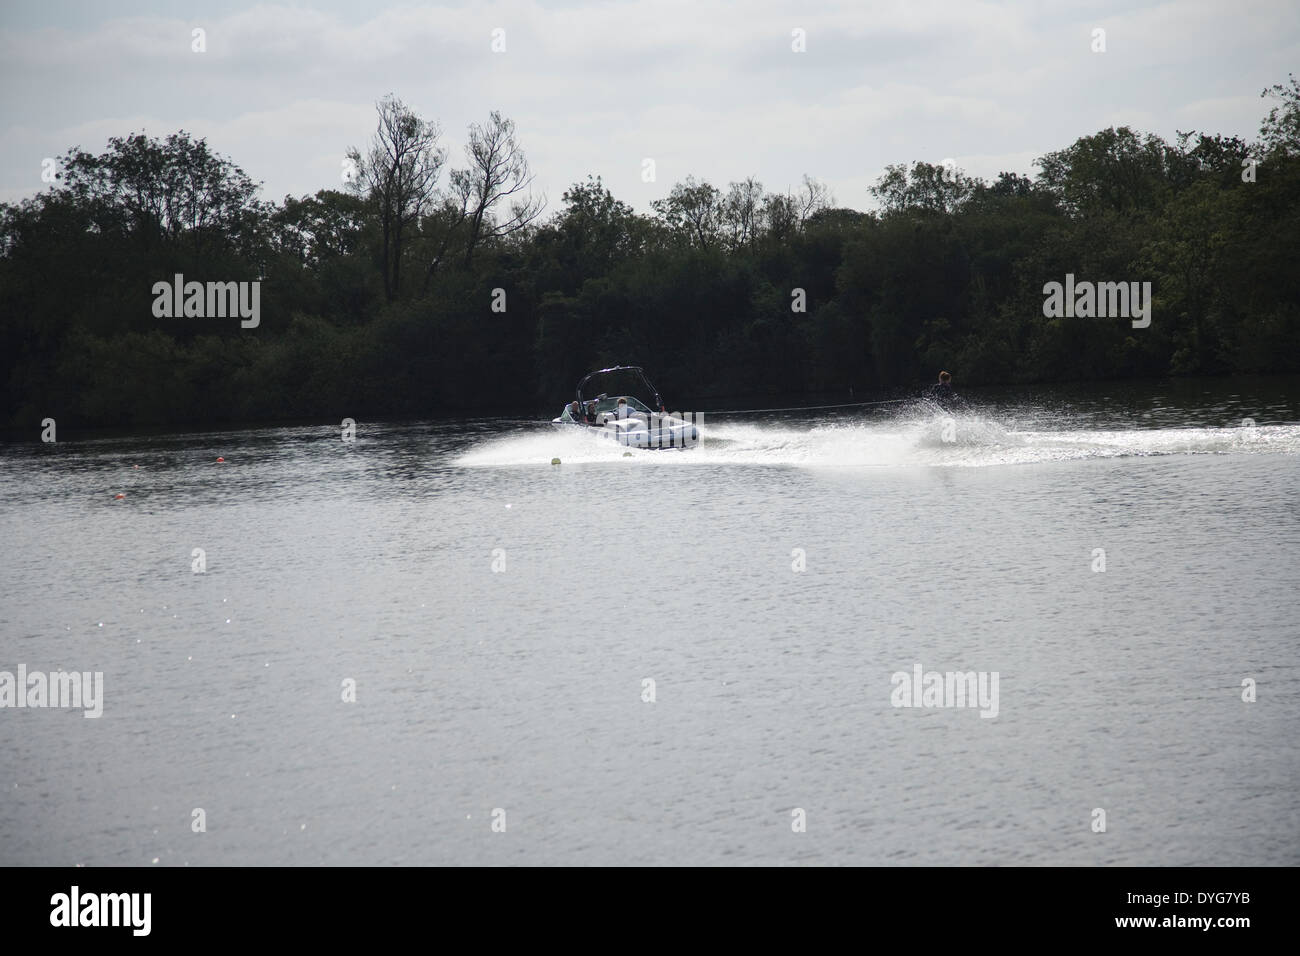 Young Woman waterskiing Stock Photo